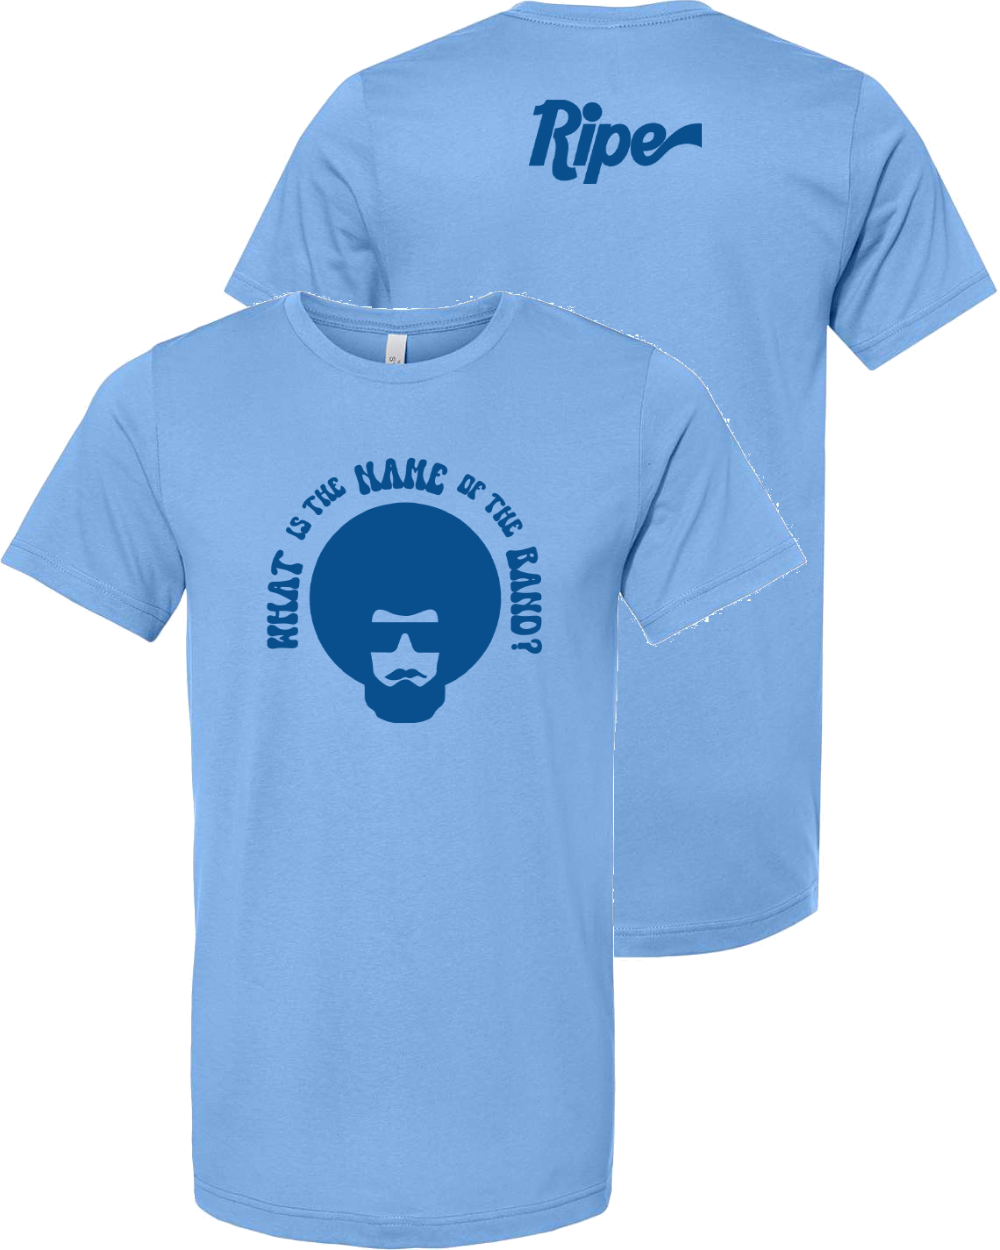 What Is The Name Of The Band Tee- Blue